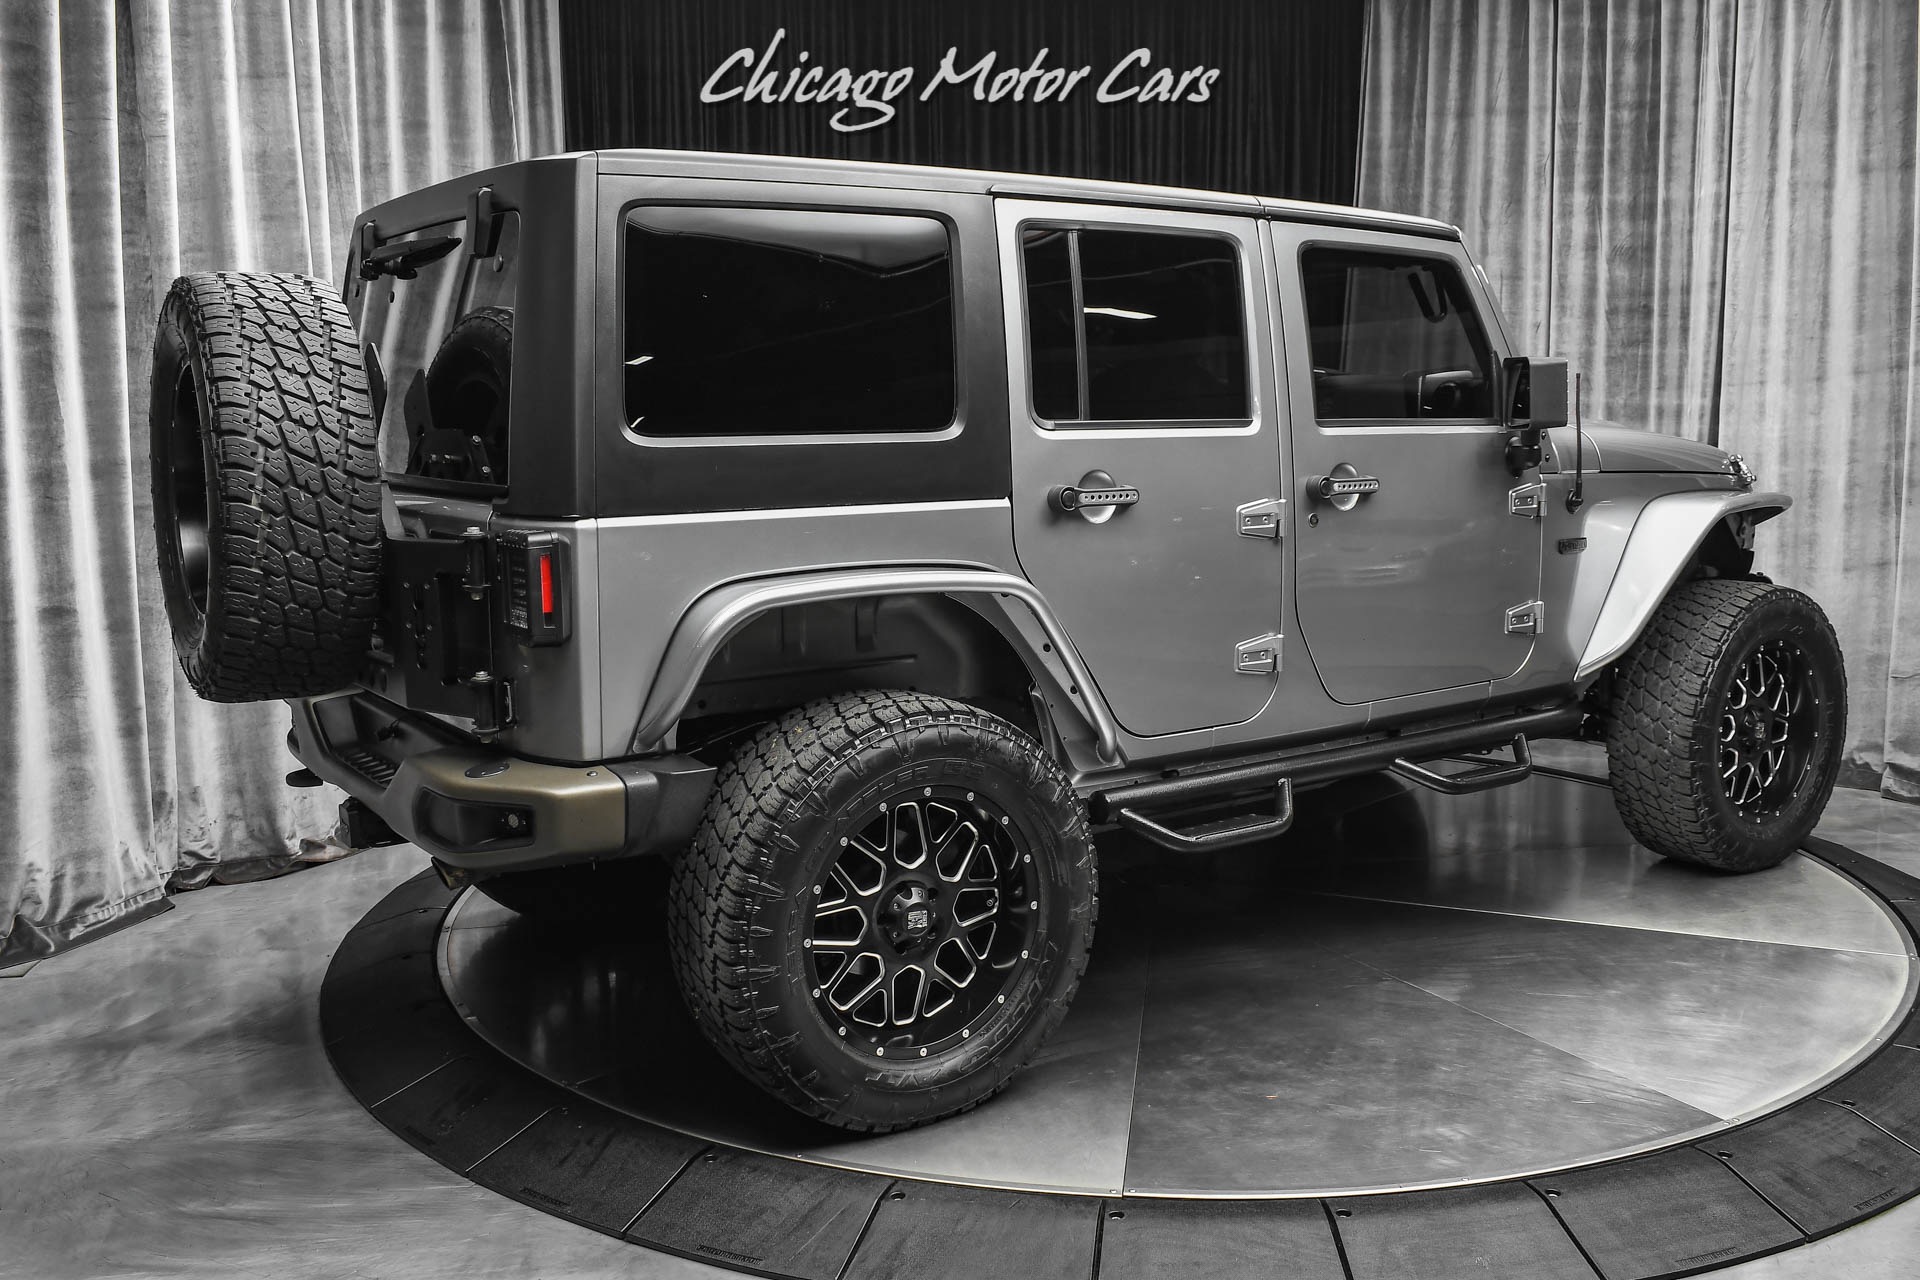 Used-2017-Jeep-Wrangler-Unlimited-4x4-75th-Anniversary-XD-Series-Wheels-Huge-Upgrades-Leather